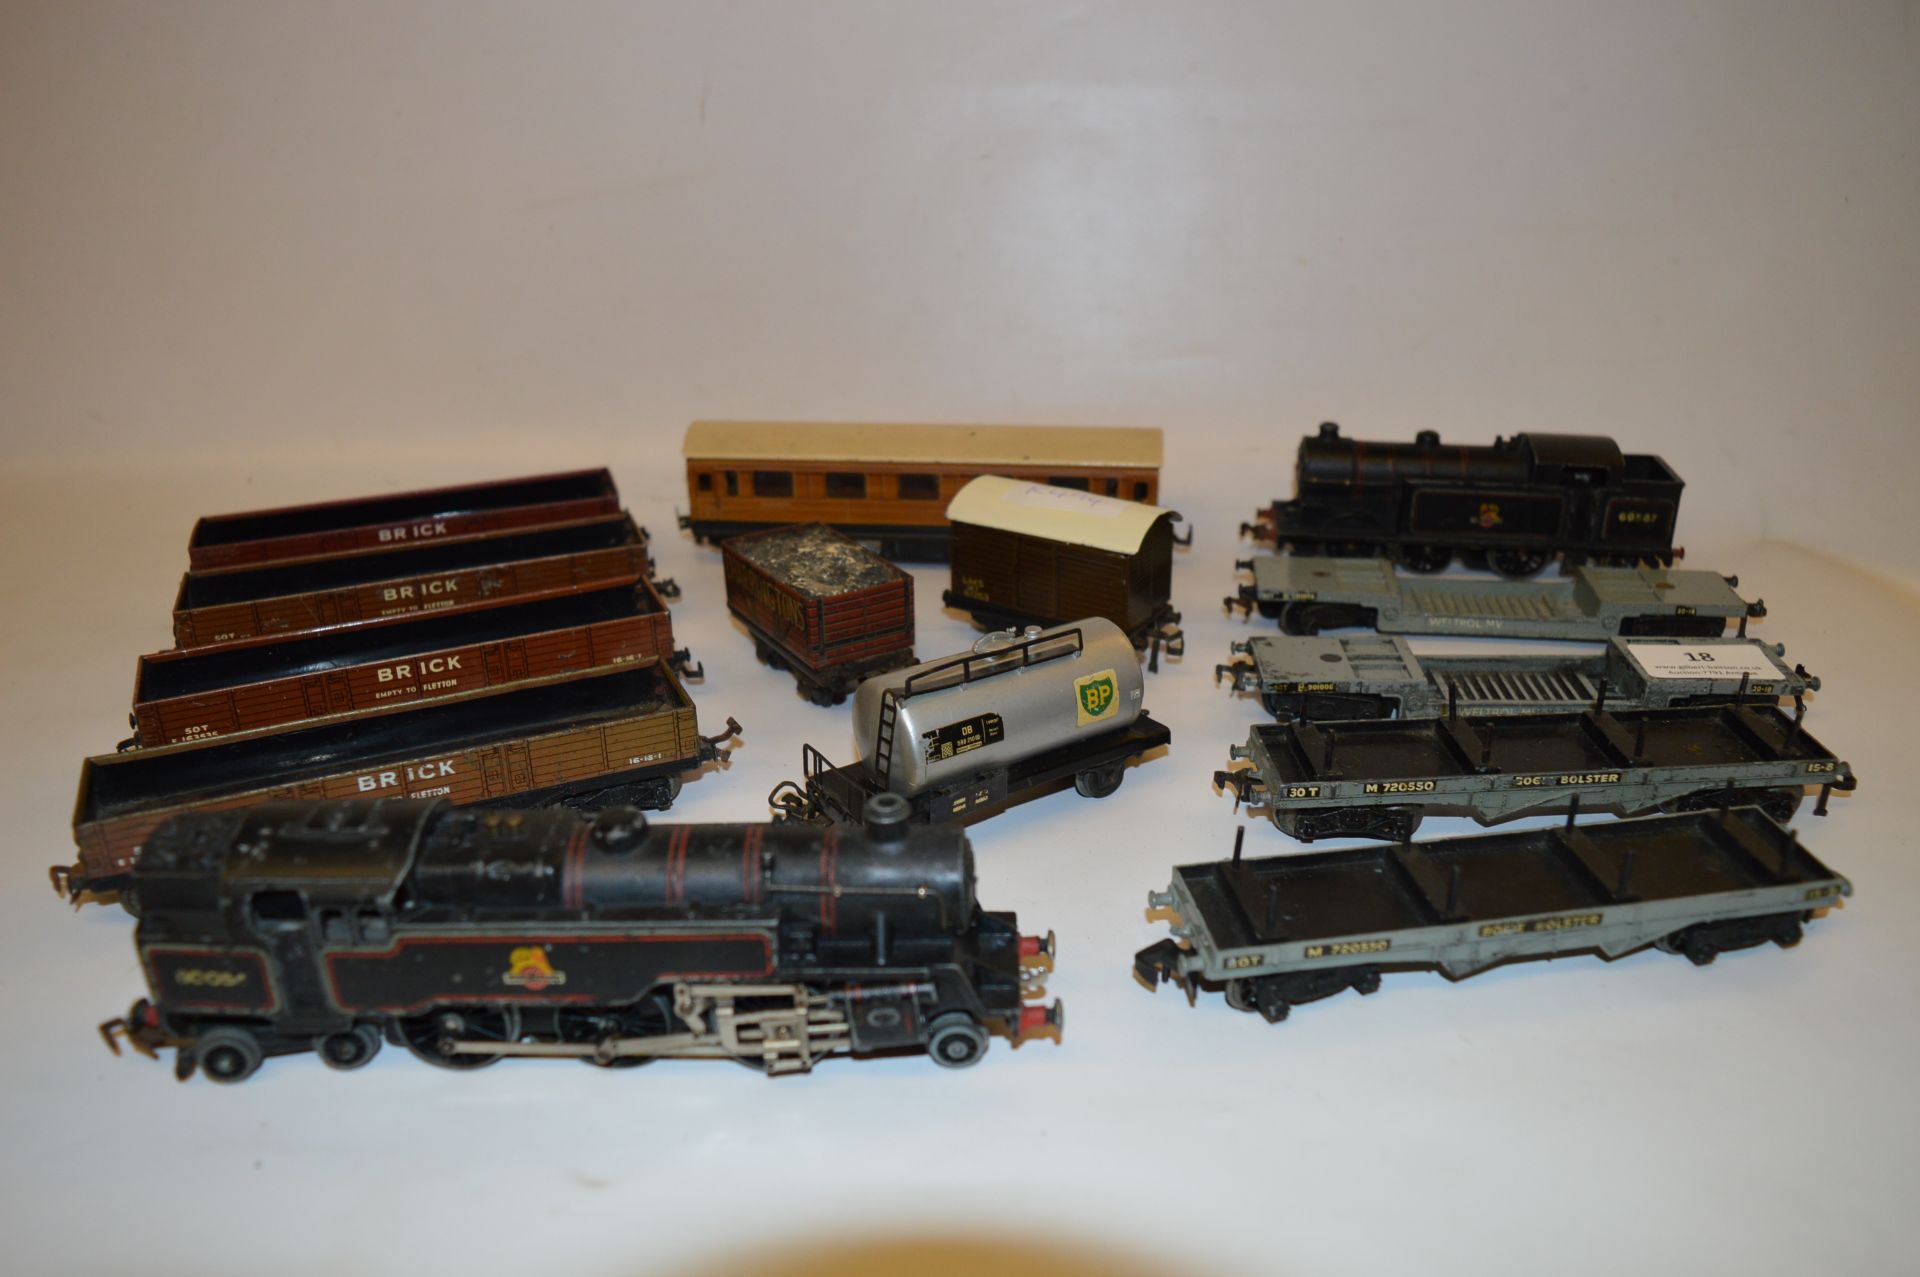 Hornby Dublo Train Set with Engines